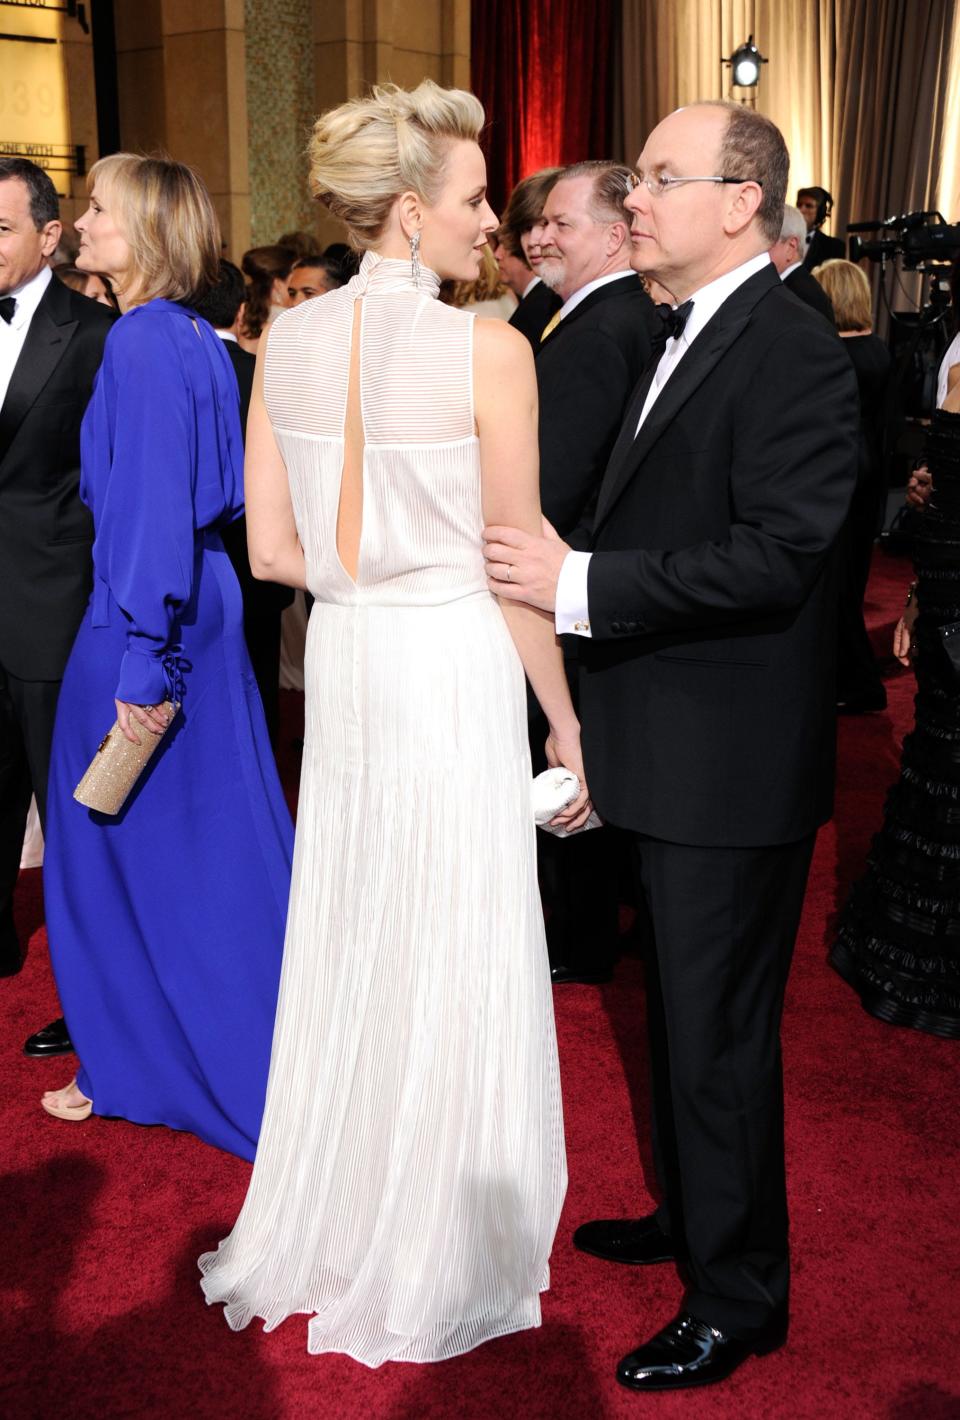 Princess Charlene and Prince Albert II of Monaco at the 84th Annual Academy Awards held on February 26, 2012 in Hollywood, California.